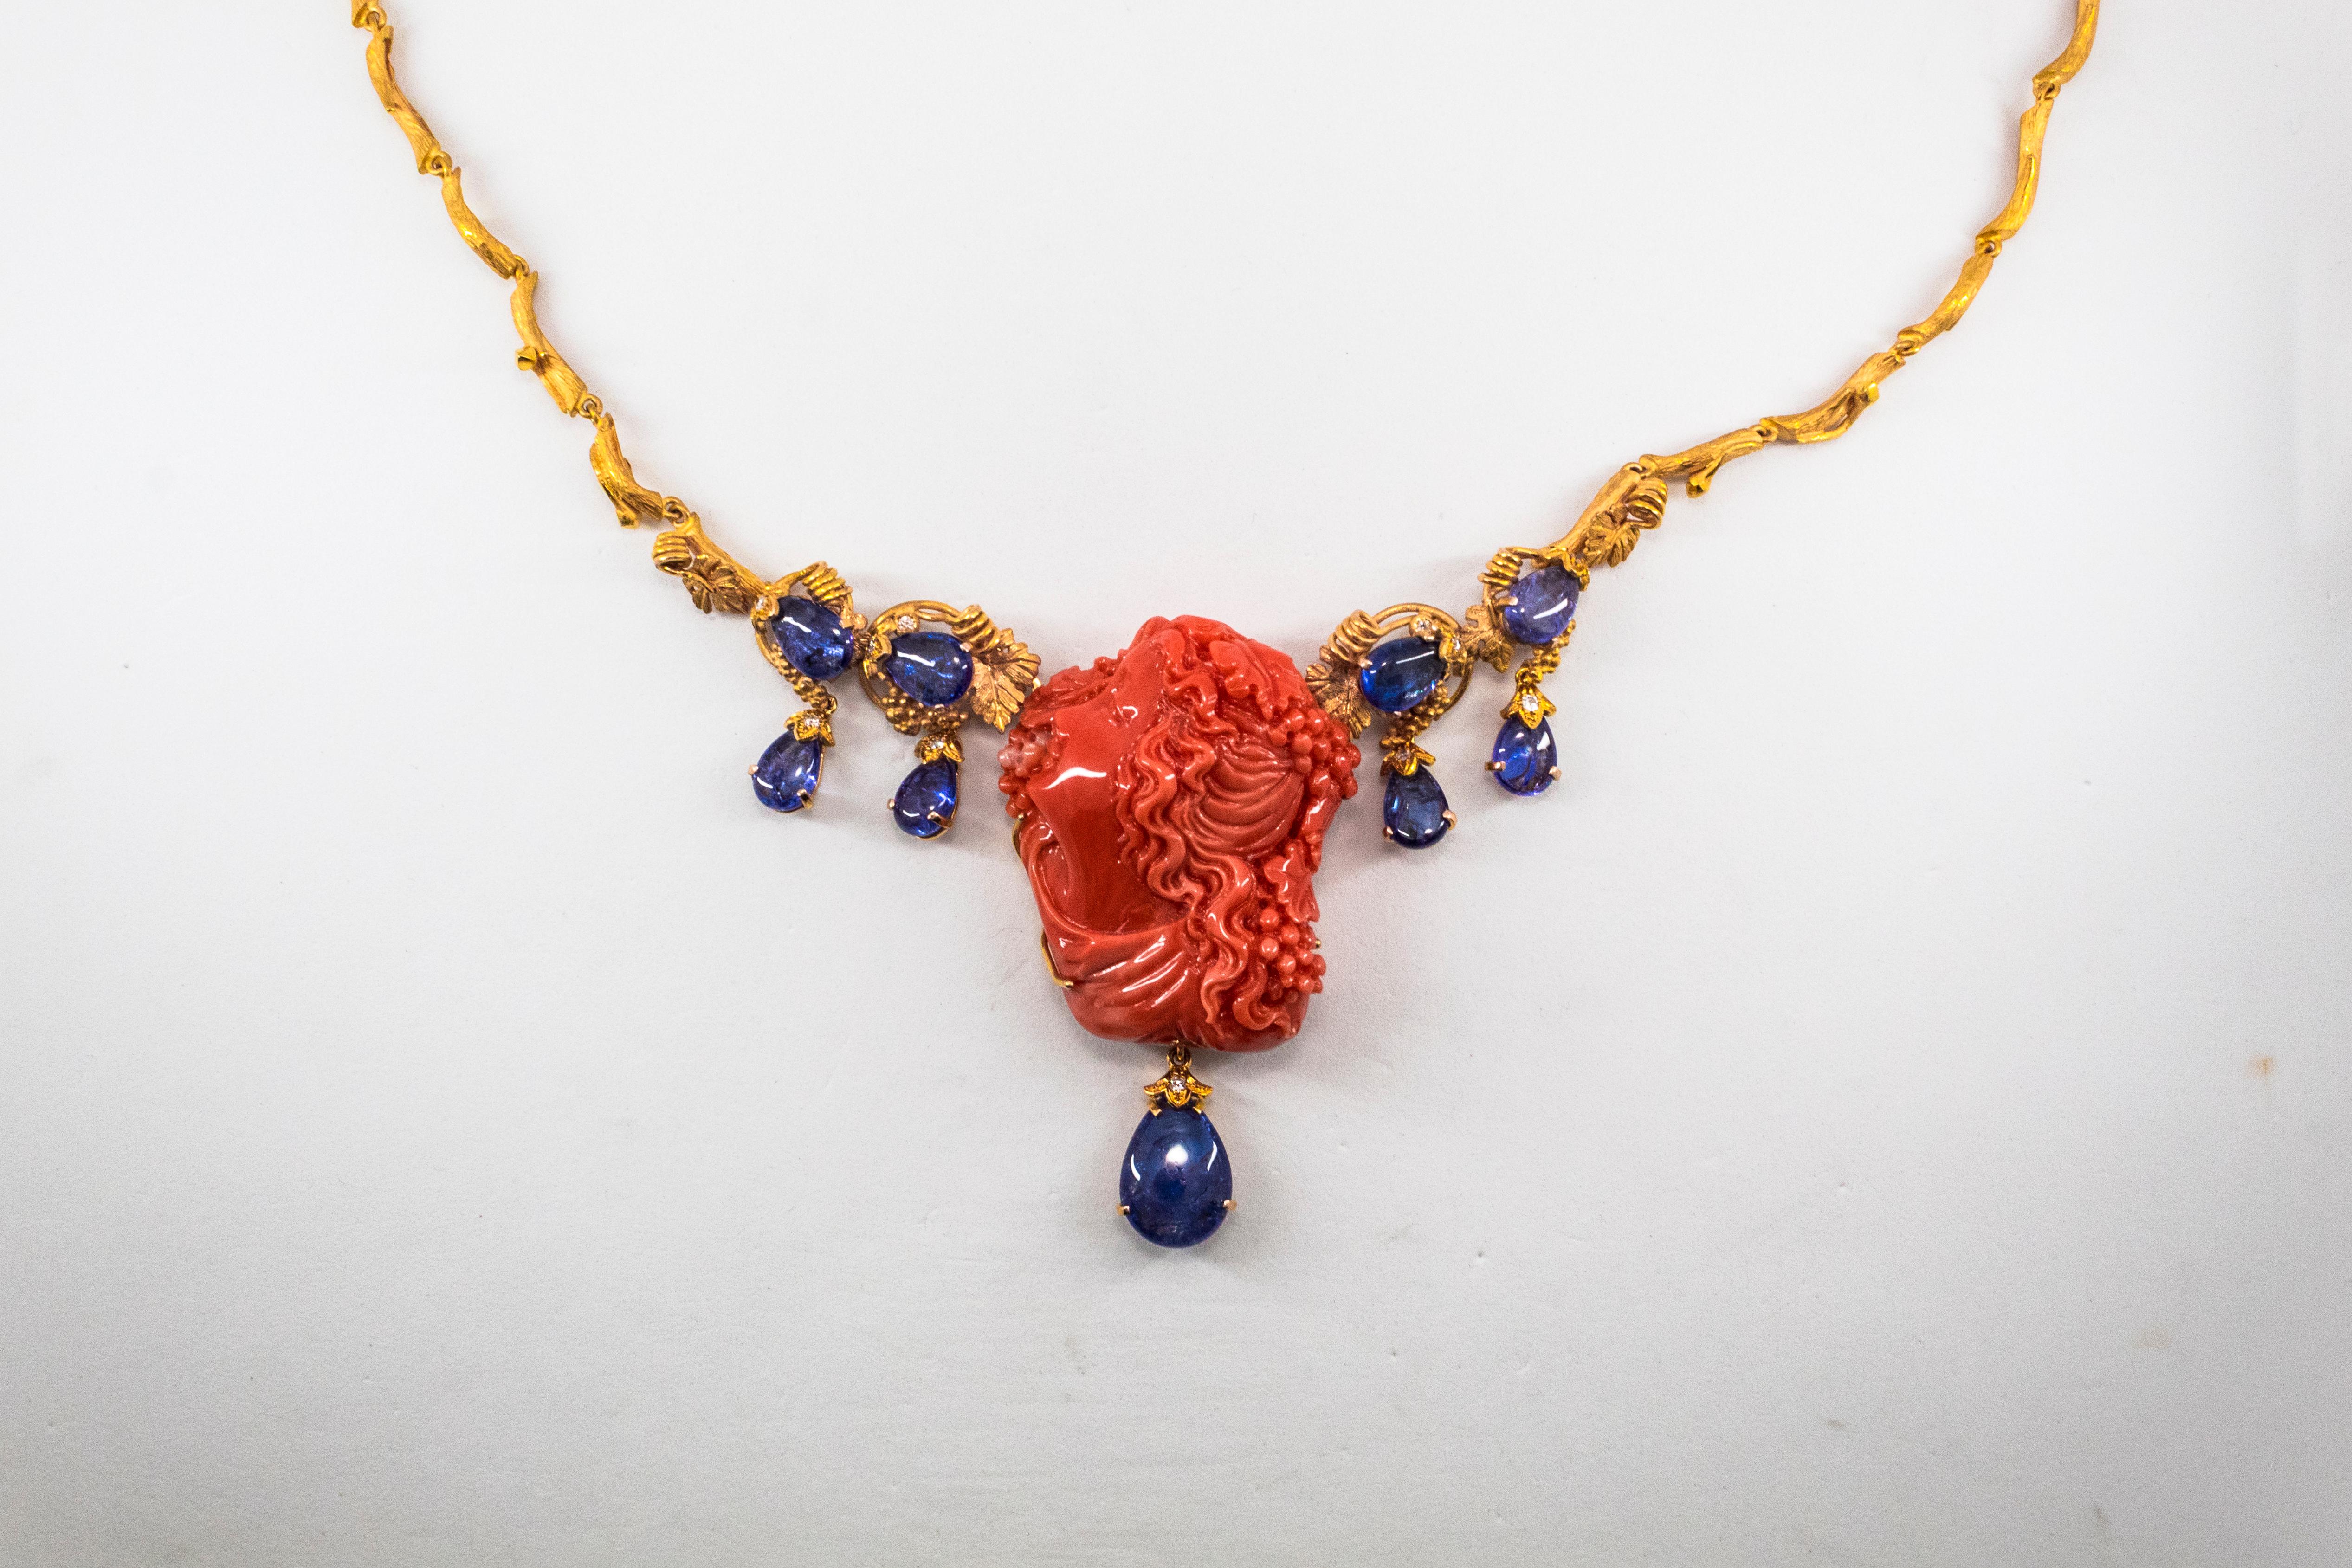 Brilliant Cut 31.93 Carat Tanzanite White Diamond Red Carved Coral Yellow Gold Greek Necklace